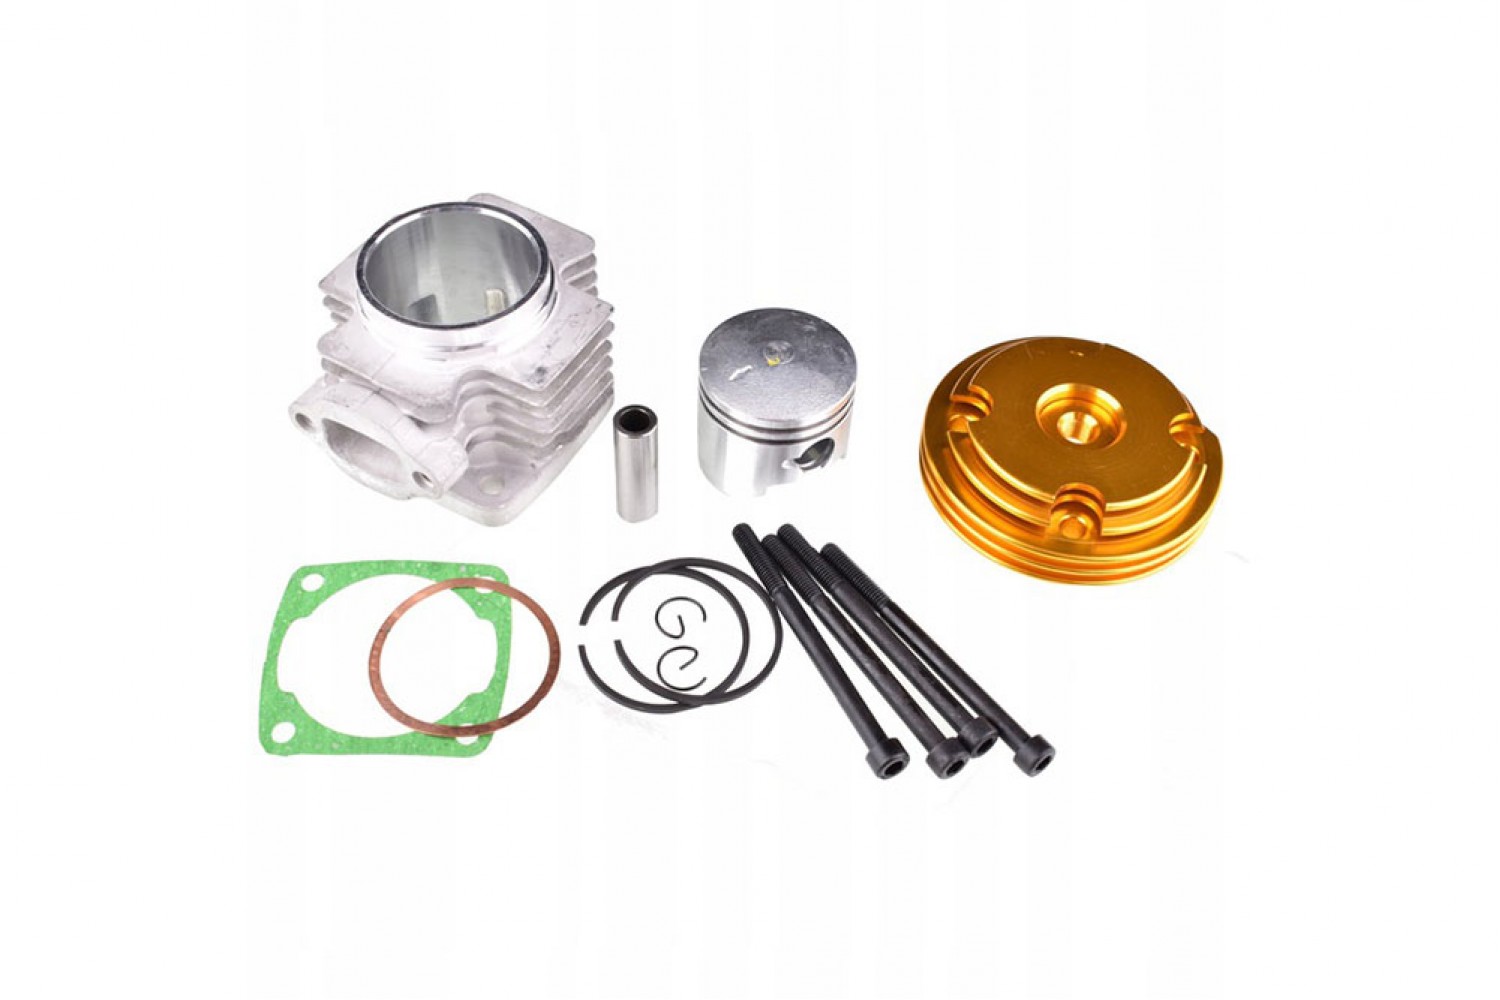 WOOSTAR Cylinder with Piston Kit for 43cc 49cc 44mm Bore 2 Stroke Gas Scooter Mini Pocket Bike 